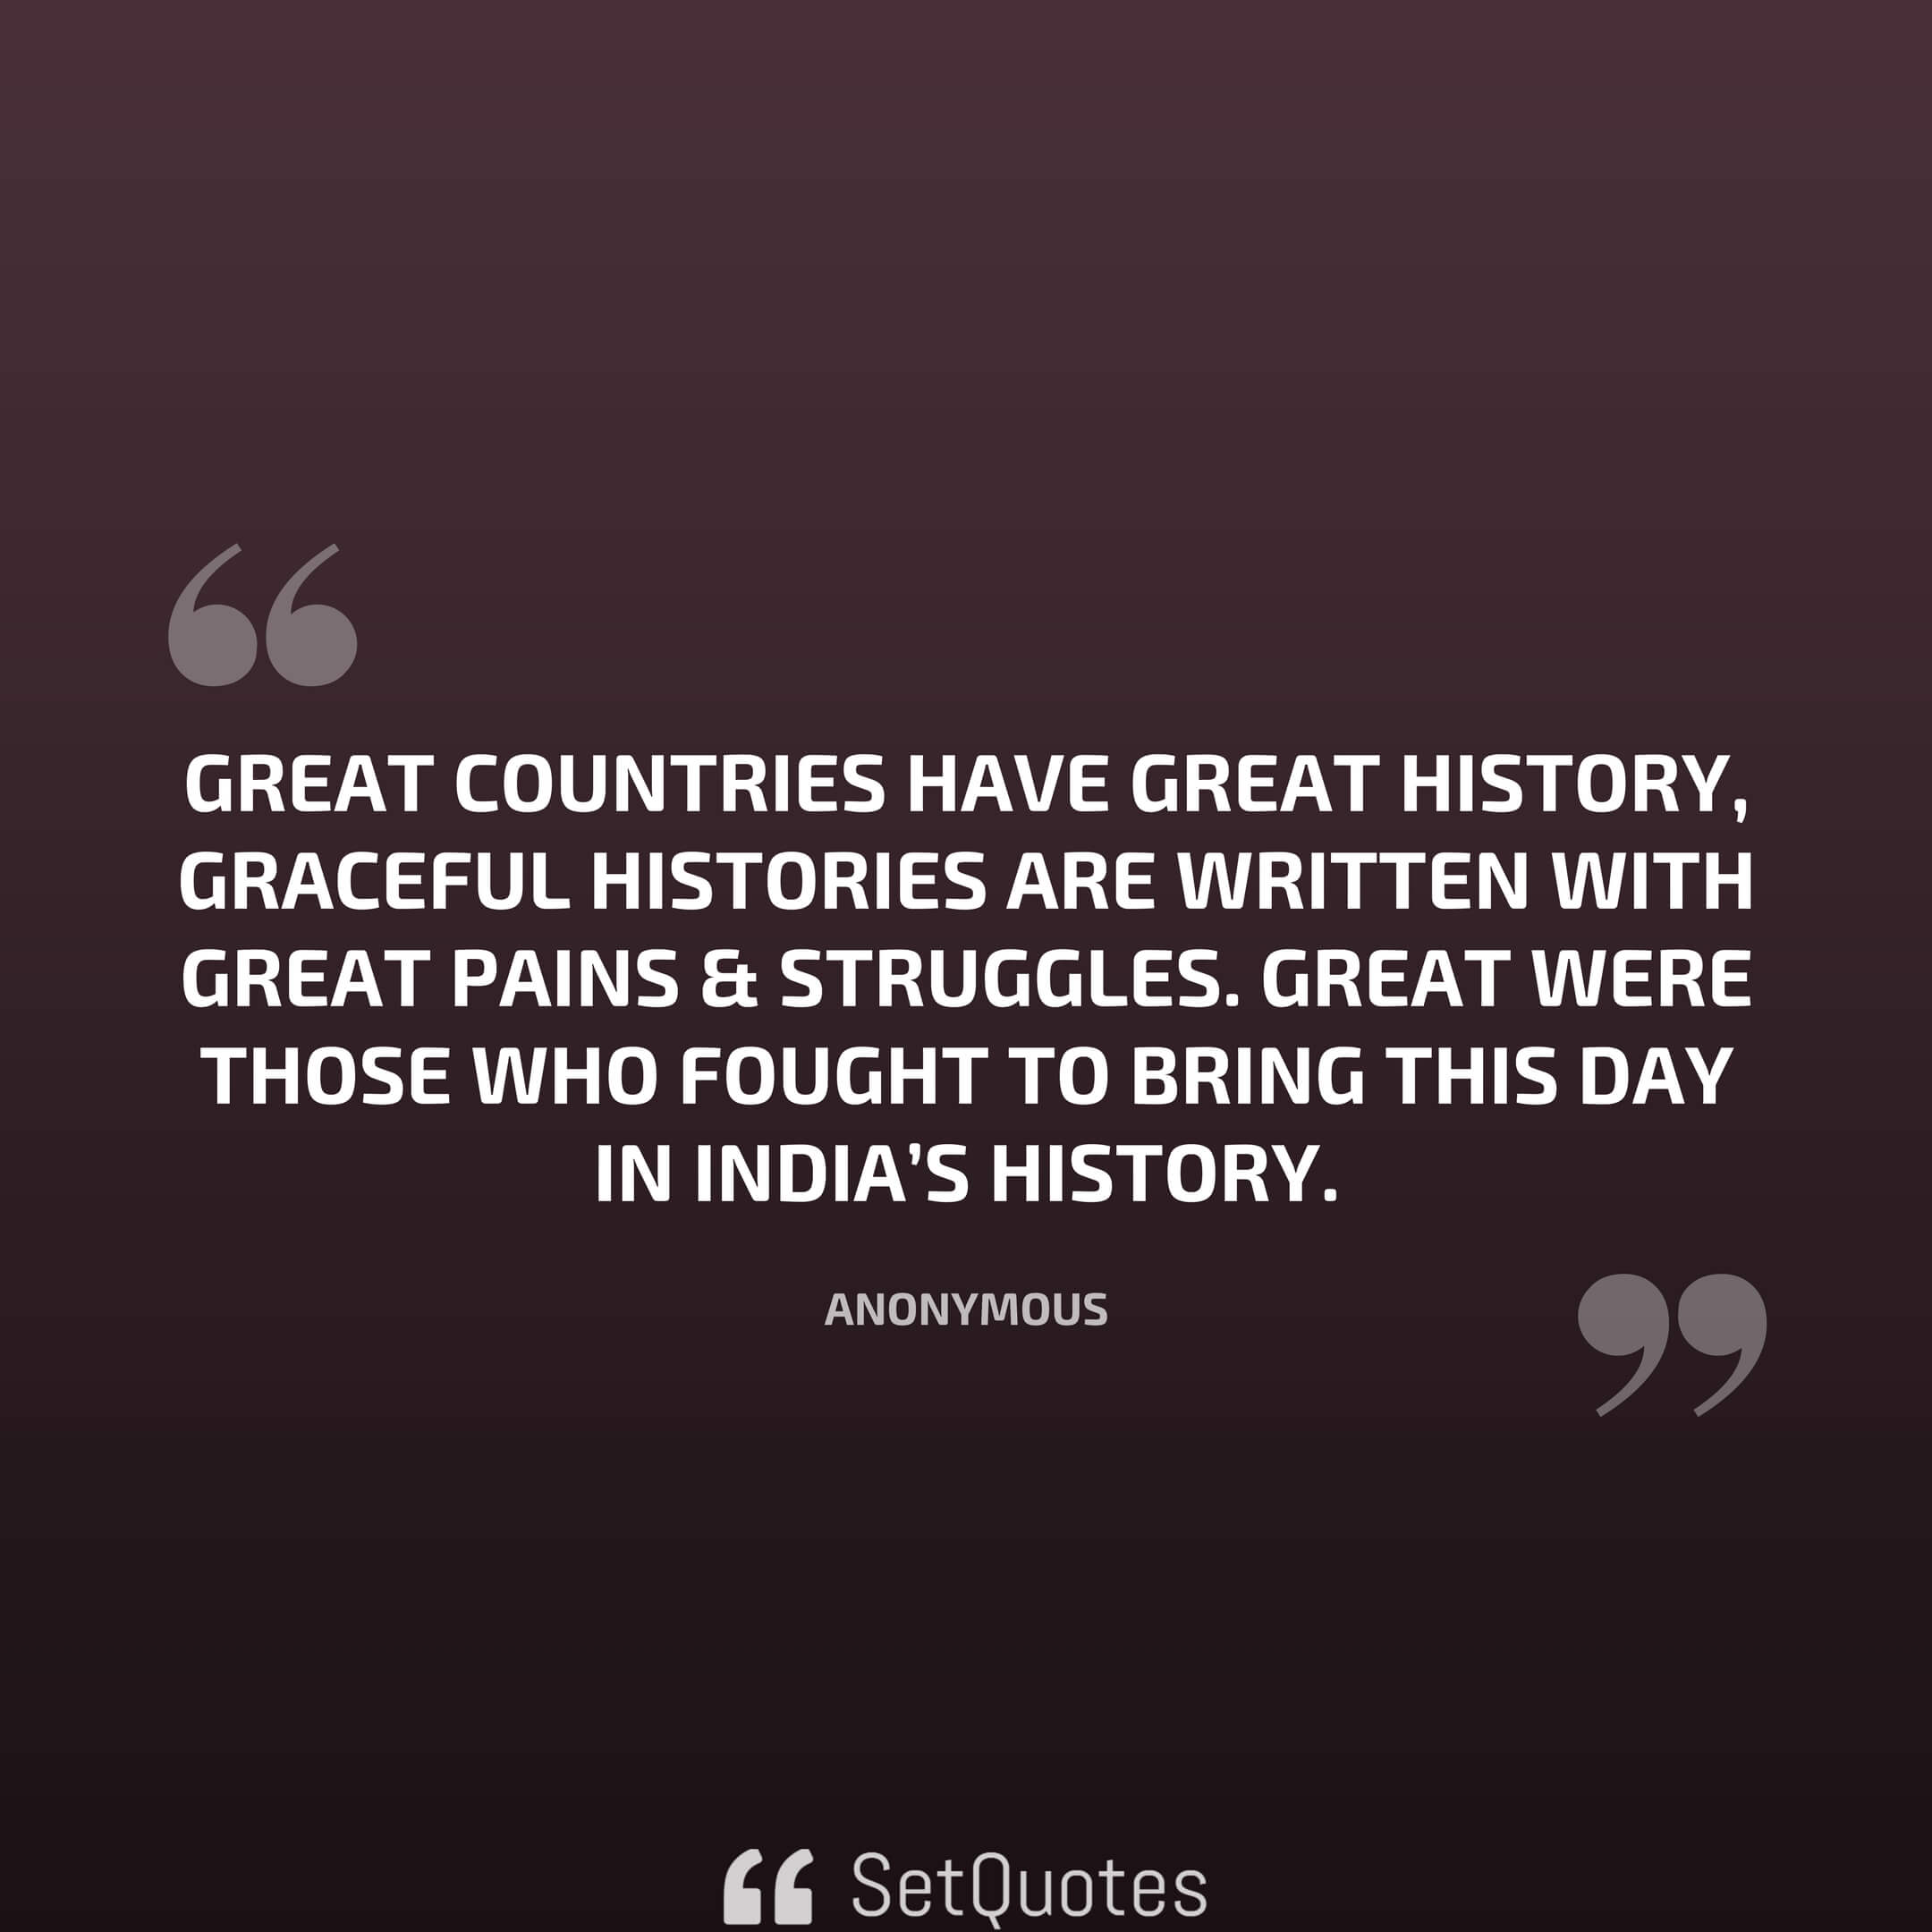 Great countries have a great history, graceful histories are written with great pains & struggles. Great were those who fought to bring this day in India’s history.